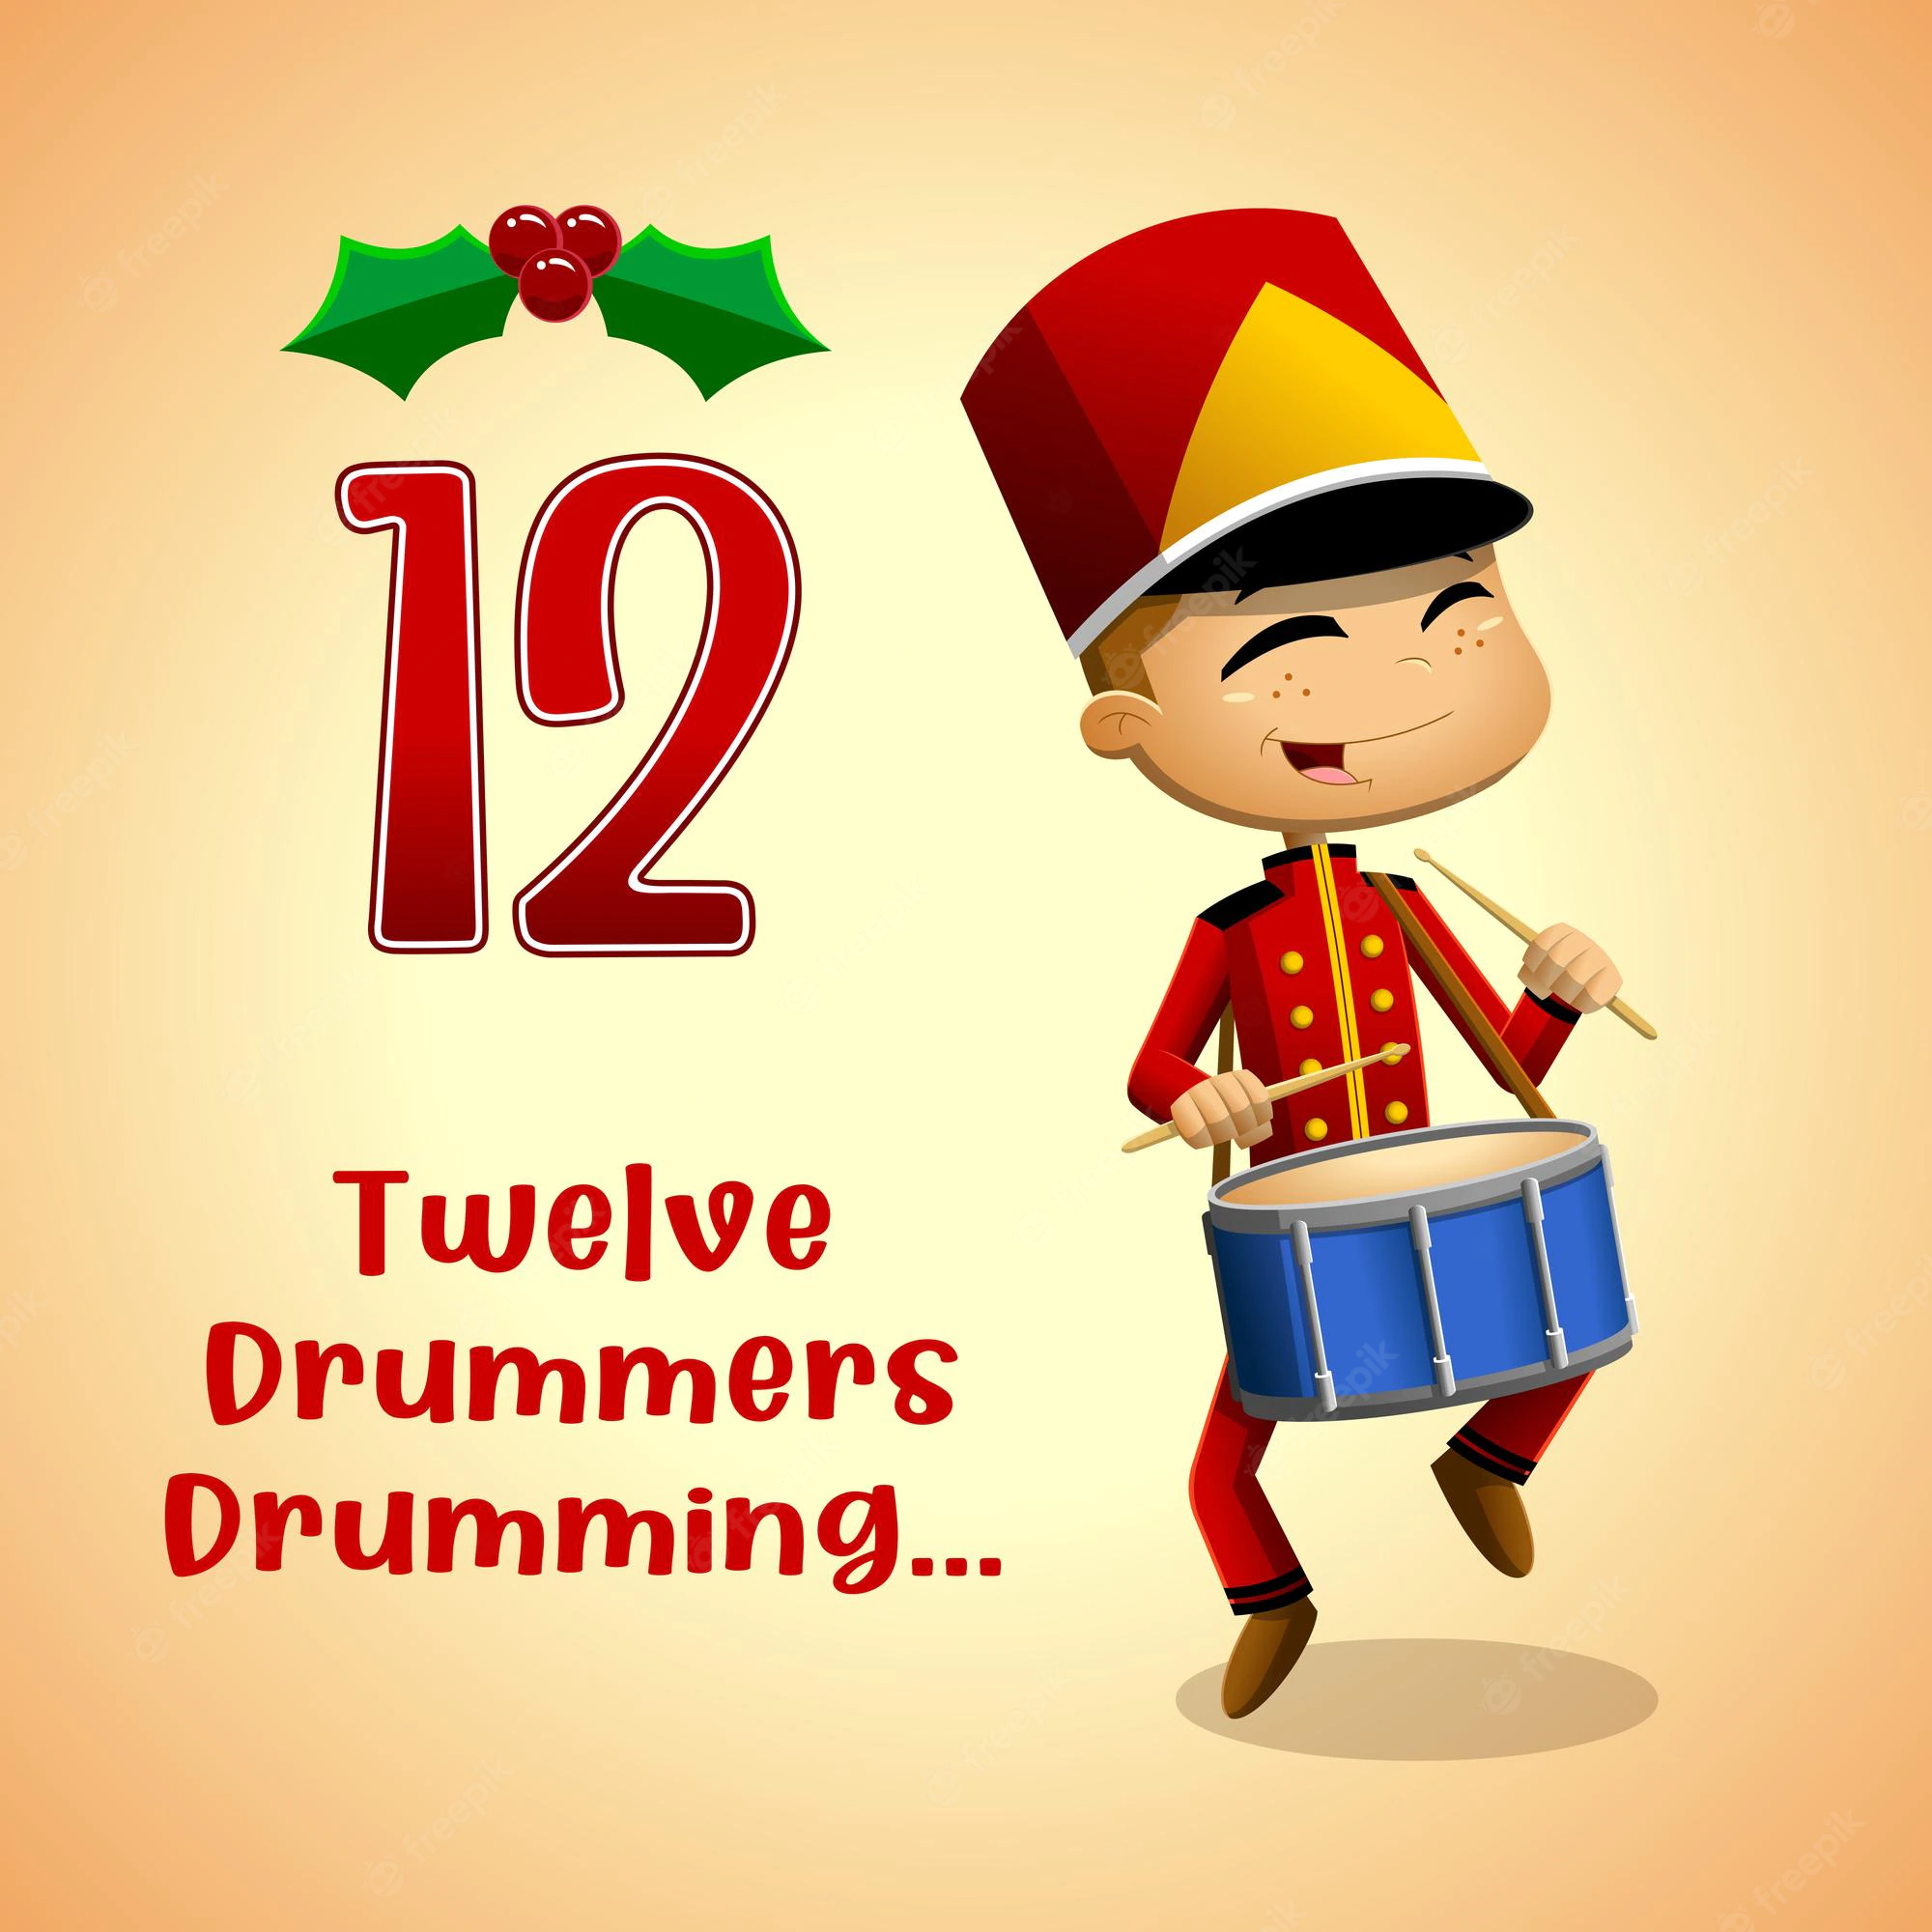 12-days-christmas-12th-day-twelve-drummers-drumming-vector-hand-drawn-illustration_20412-1917